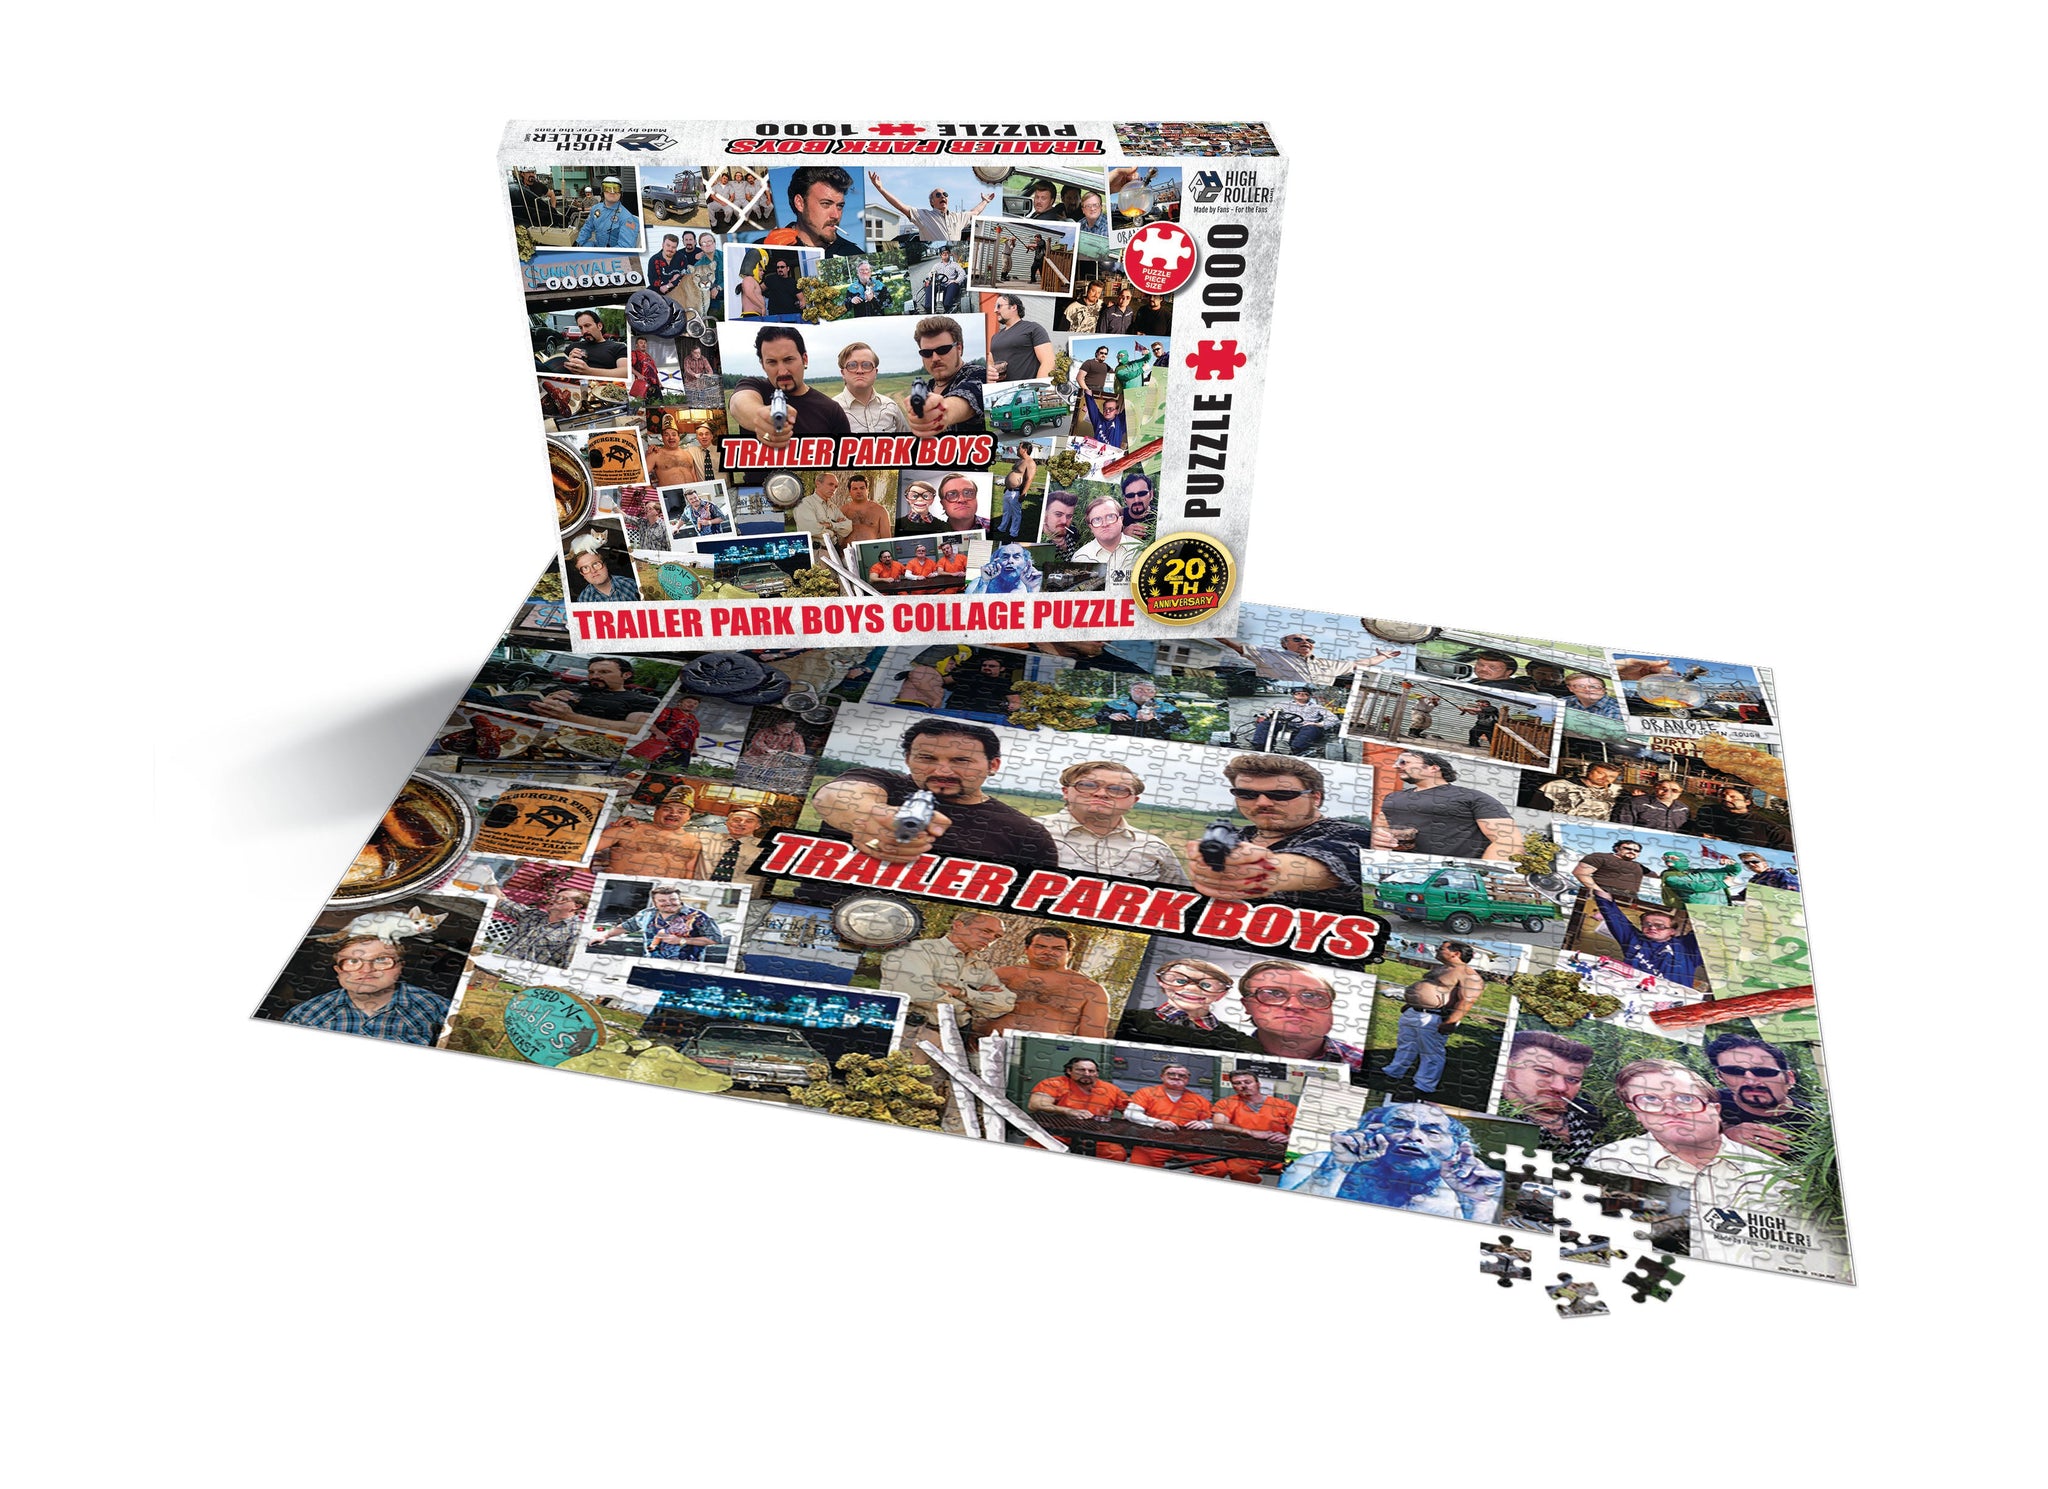 New! Trailer Park Boys 20th Anniversary Collage Puzzle